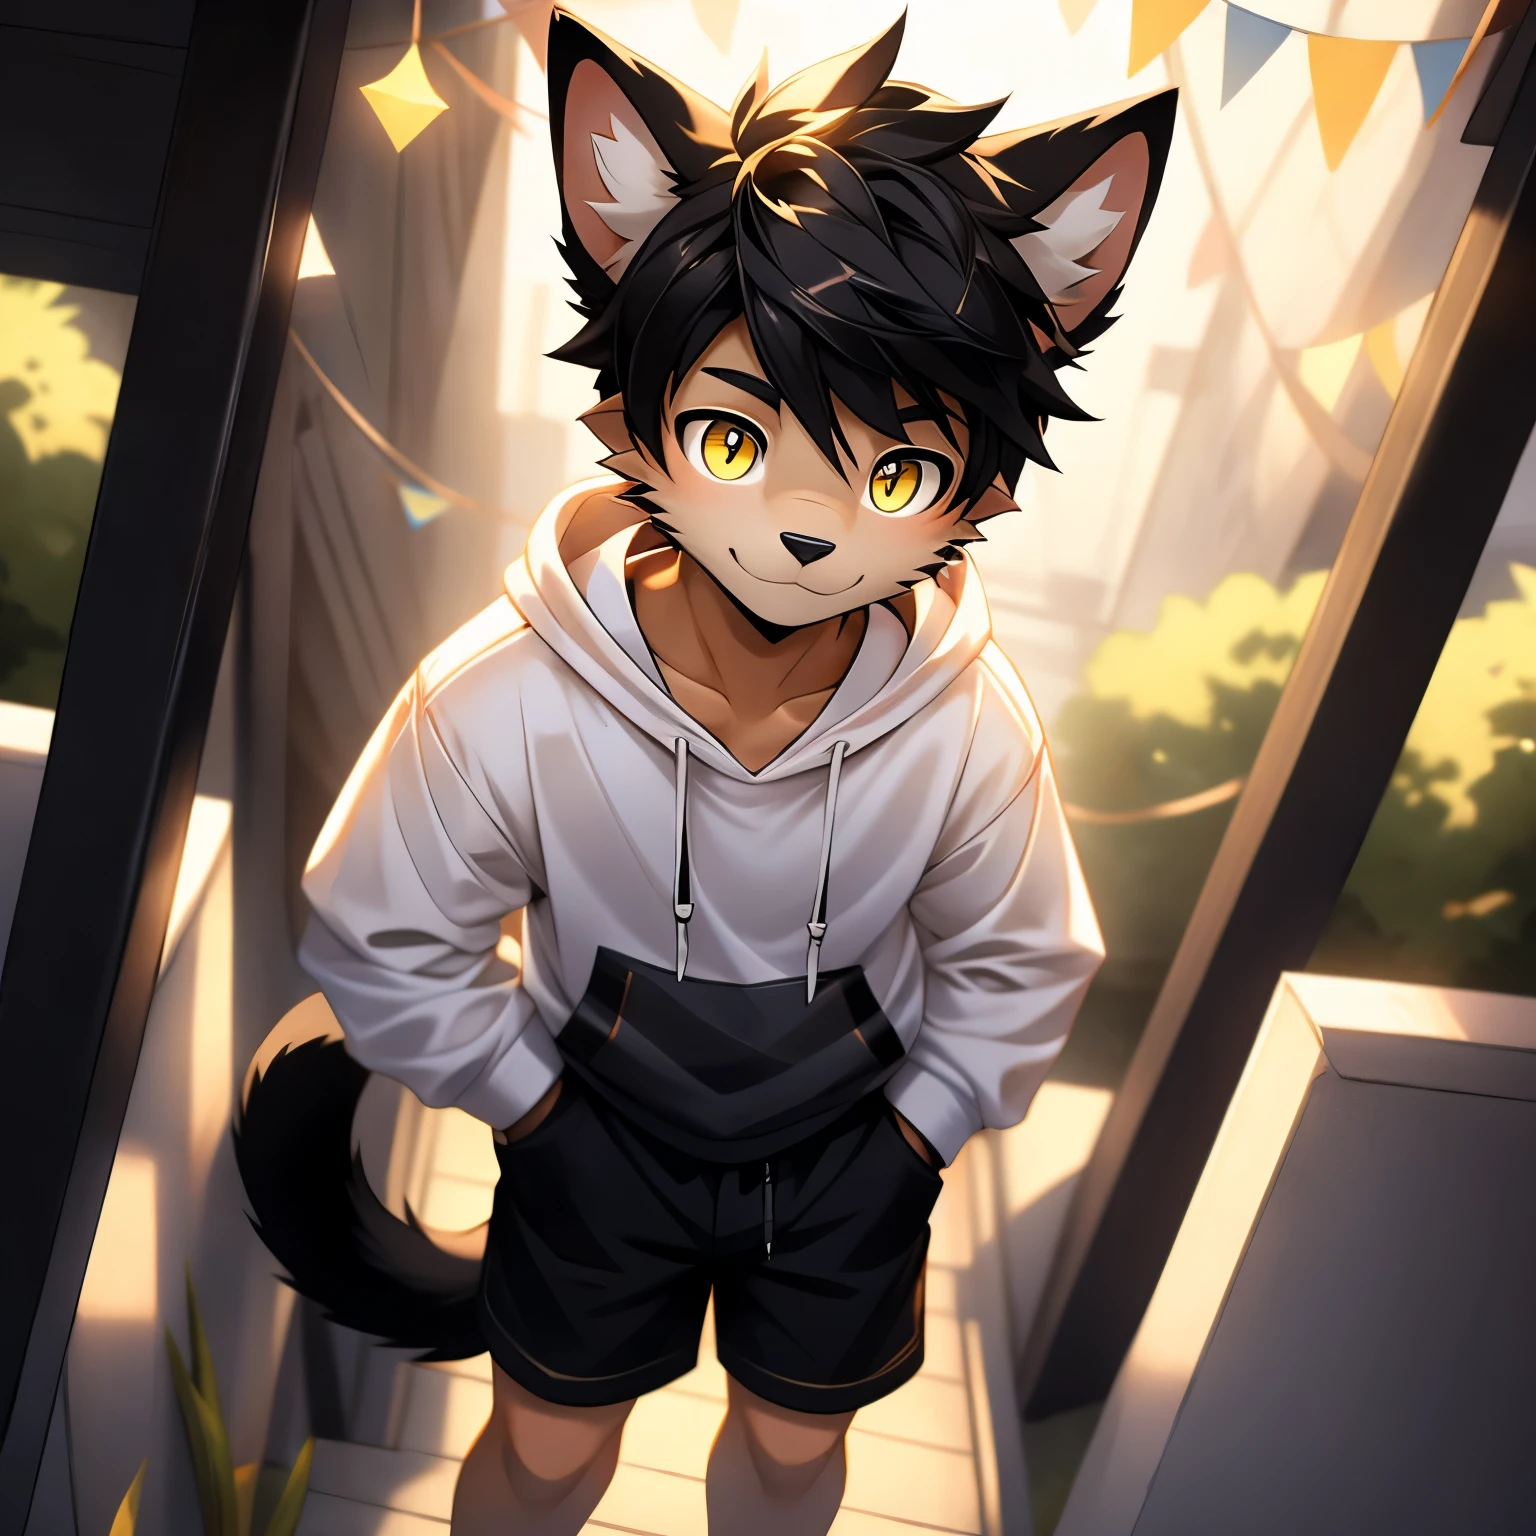 A black cat, furry, furry guy, 15 years old, 17 year old black cat, shota furry teen, whit yellow eyes, yellow eyes, black cat furry boy, Cute hoodie, cute shorts, wearing a hoodie and shorts, tween, teen, Teenager, 15 years old, Adult, twink, adult furry, of age, twink, 20 years old, furry adult, One boy, only one person, furry boy alone